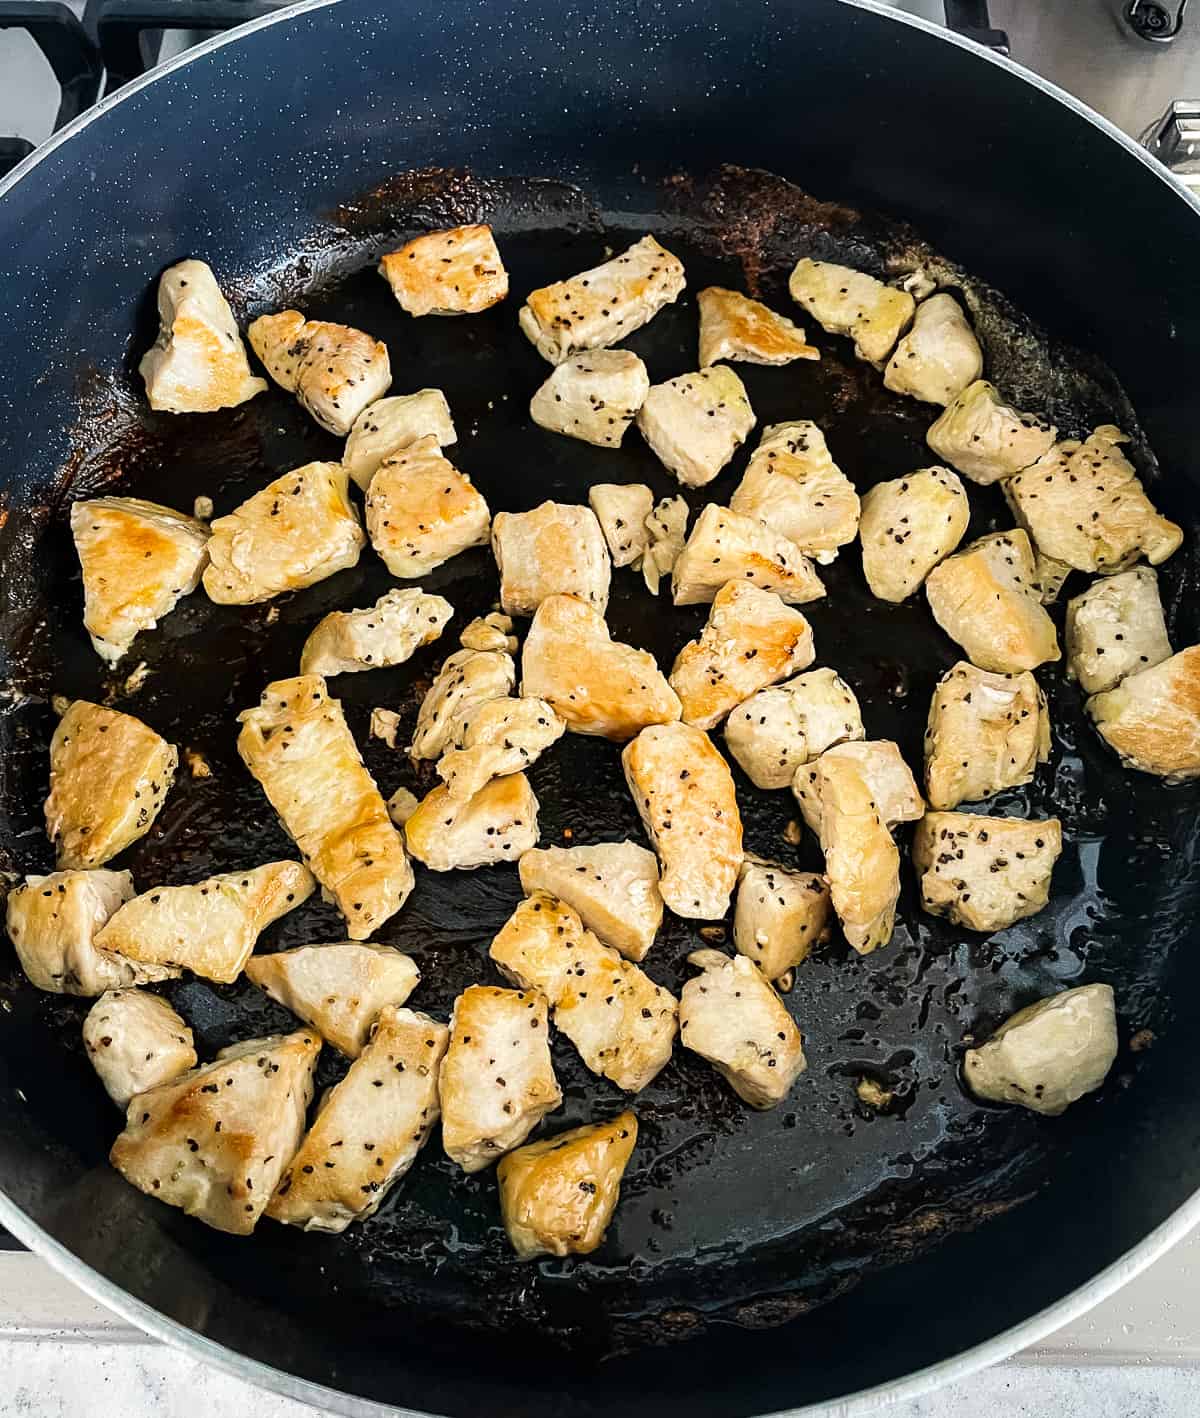 cubed chicken breast browning in a skillet